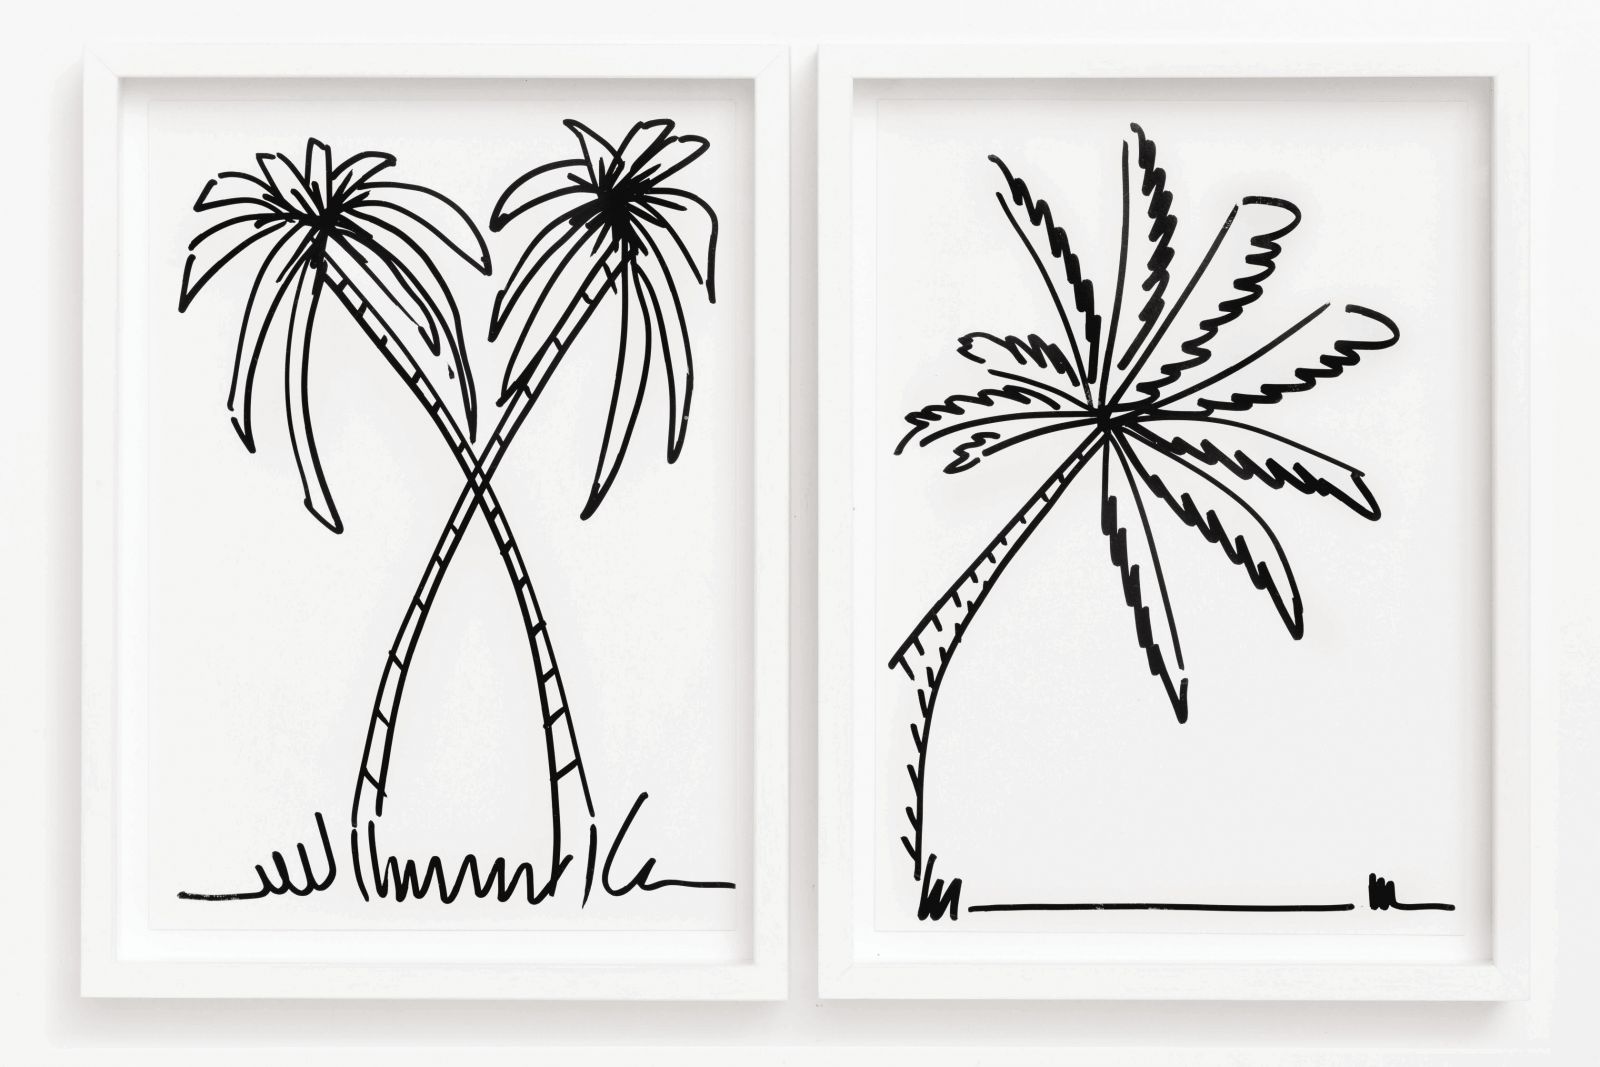 Marco Strappato, 32 days at Rupert, Vilnius Looking into the wood, dreaming palm trees (2017/2018; series of 32†marker pen on paper drawings of palm trees, 210 x 140†cm circa) - Courtesy of the artist and The Gallery Apart, Roma